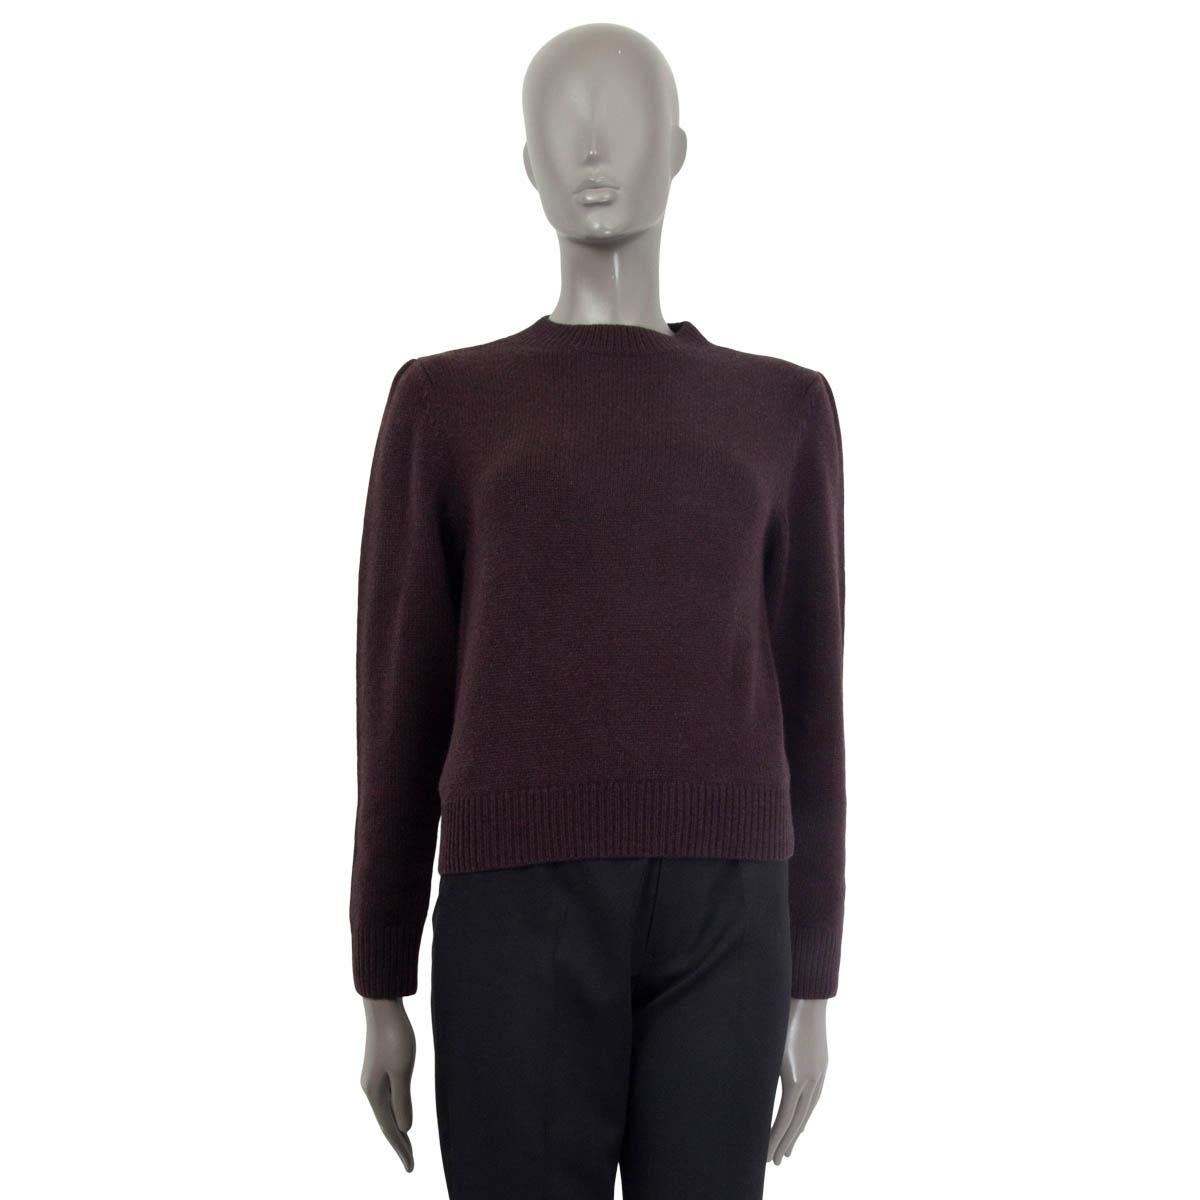 100% authentic Dries Van Noten crewneck sweater in burgundy merino wool (100%). Features long puffed sleeves. Unlined. Has been worn and is in excellent condition.

Measurements
Tag Size	XS
Size	XS
Shoulder Width	37cm (14.4in)
Bust	90cm (35.1in) to